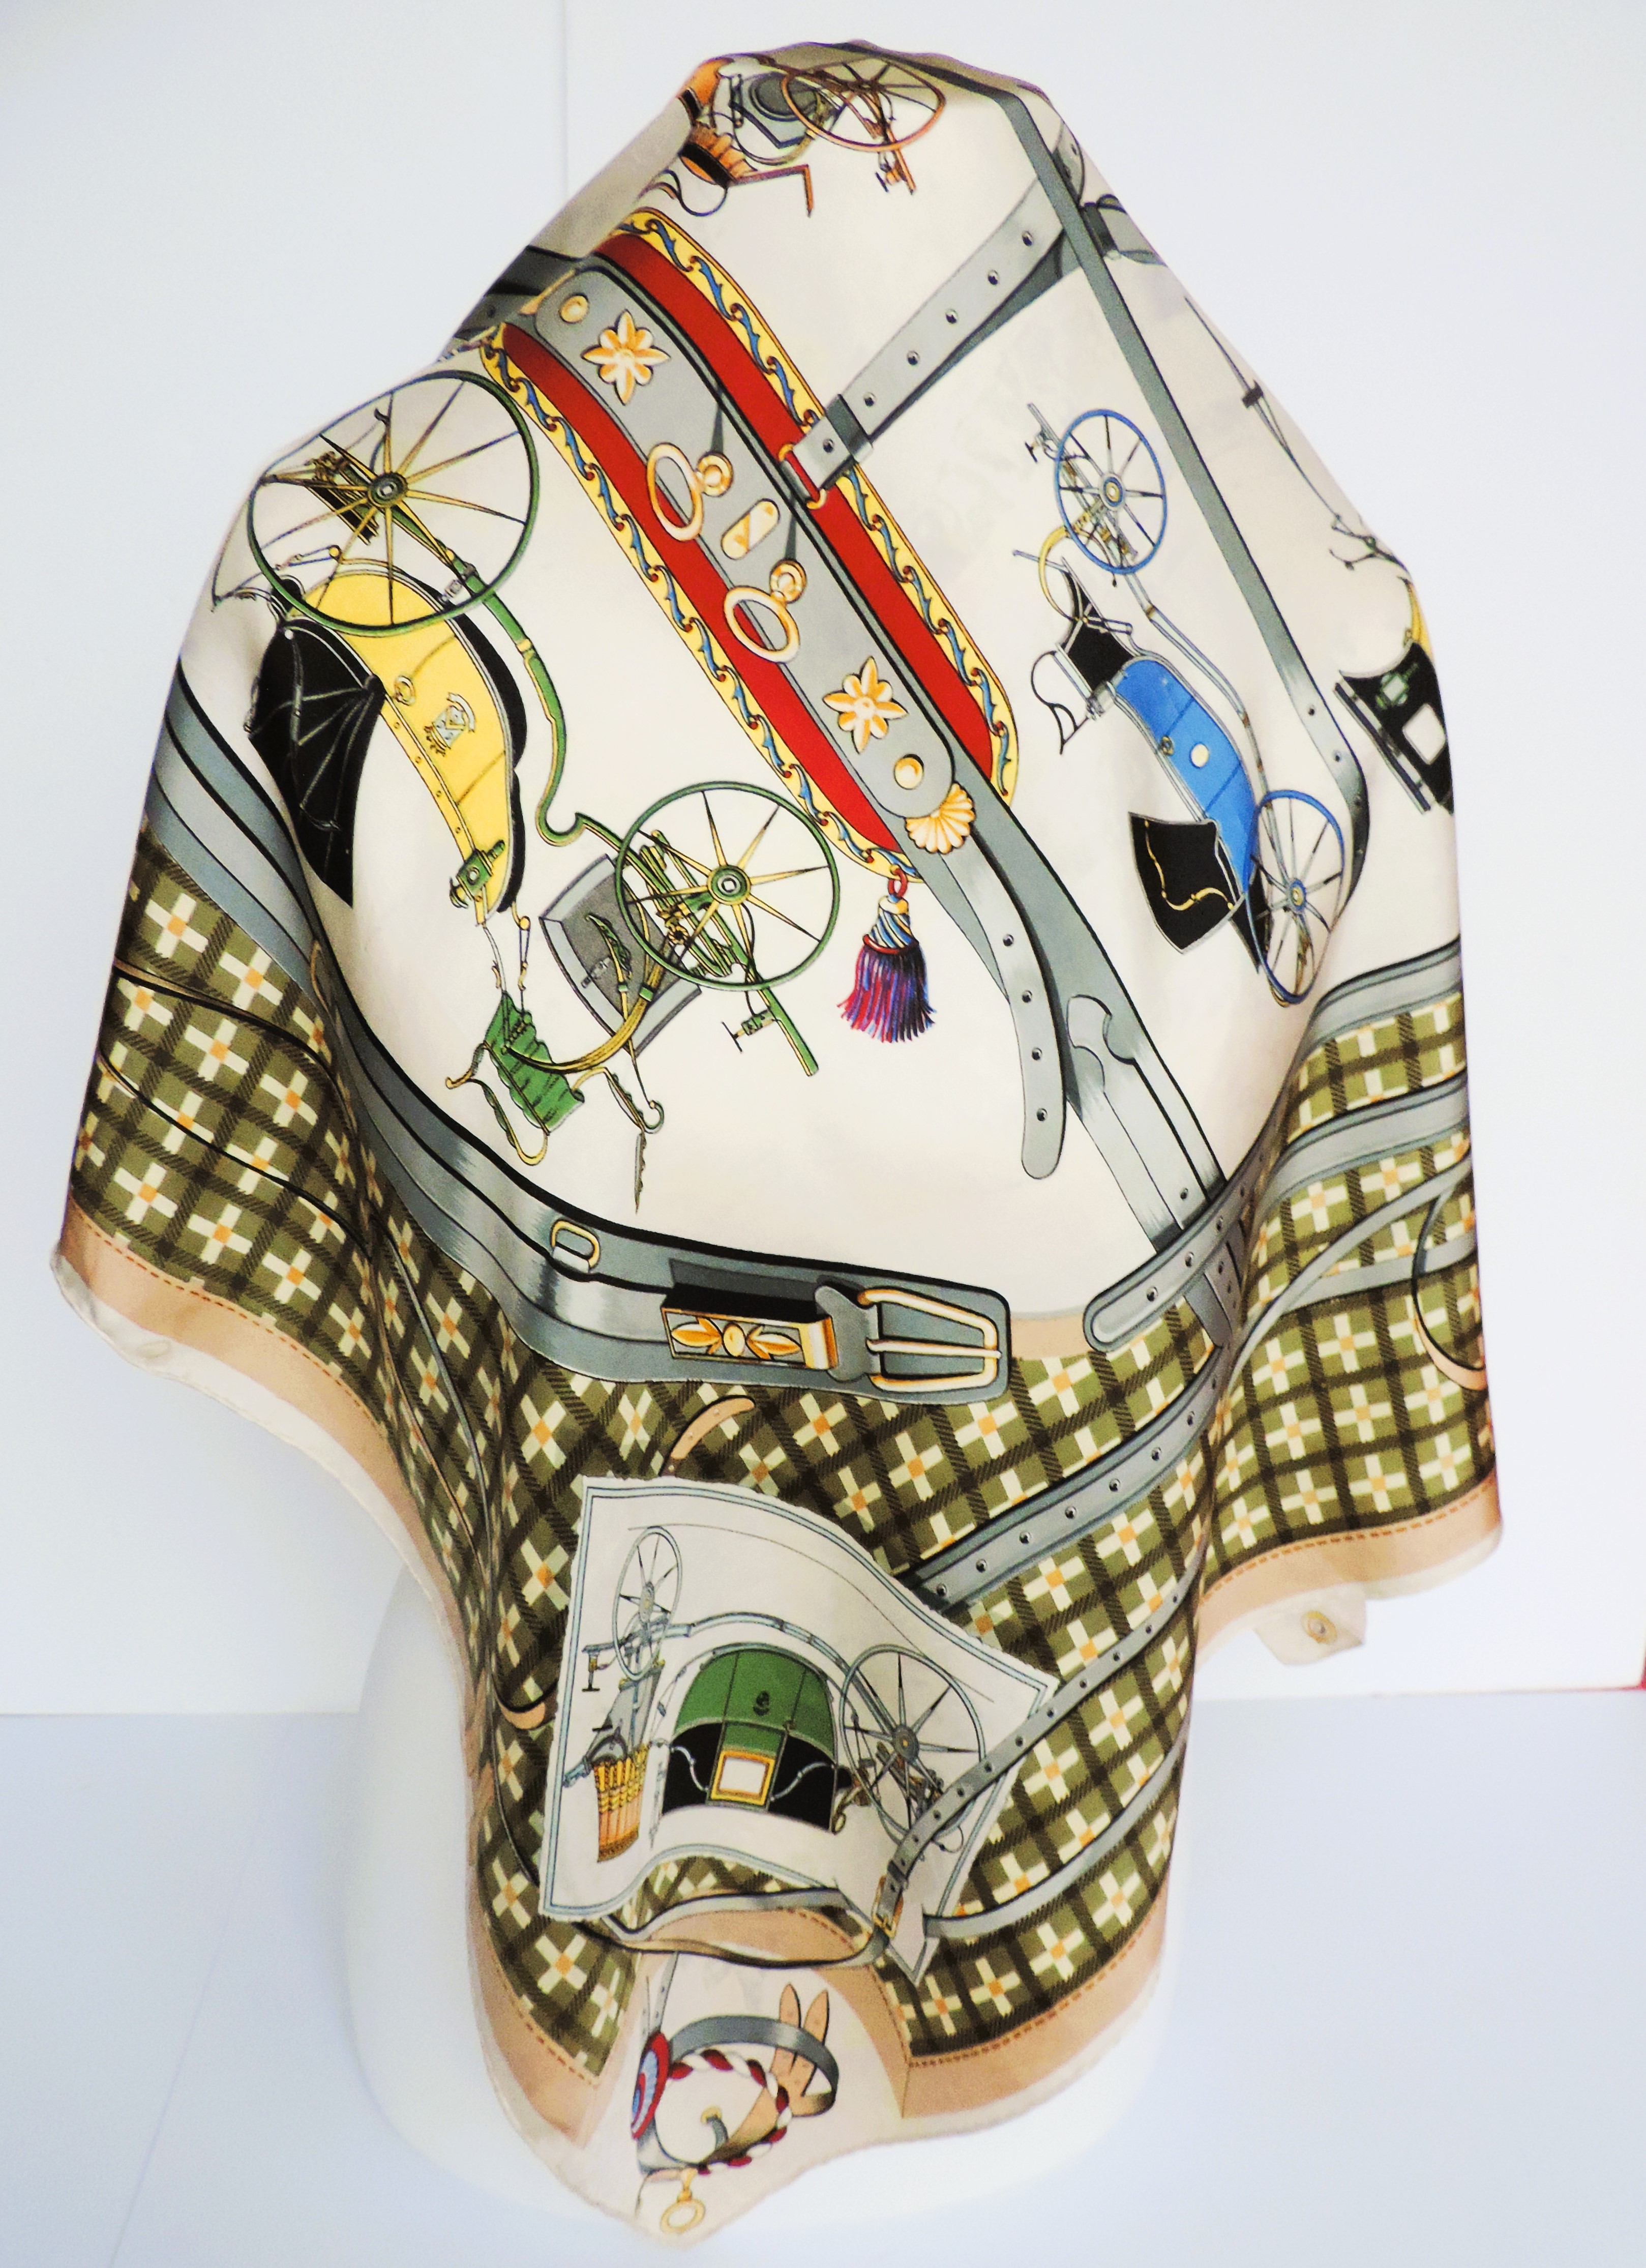 Vintage HERMES Silk Scarf Les Voitures Nouvelles by Jacques Eudel Early Issue - Image 5 of 7